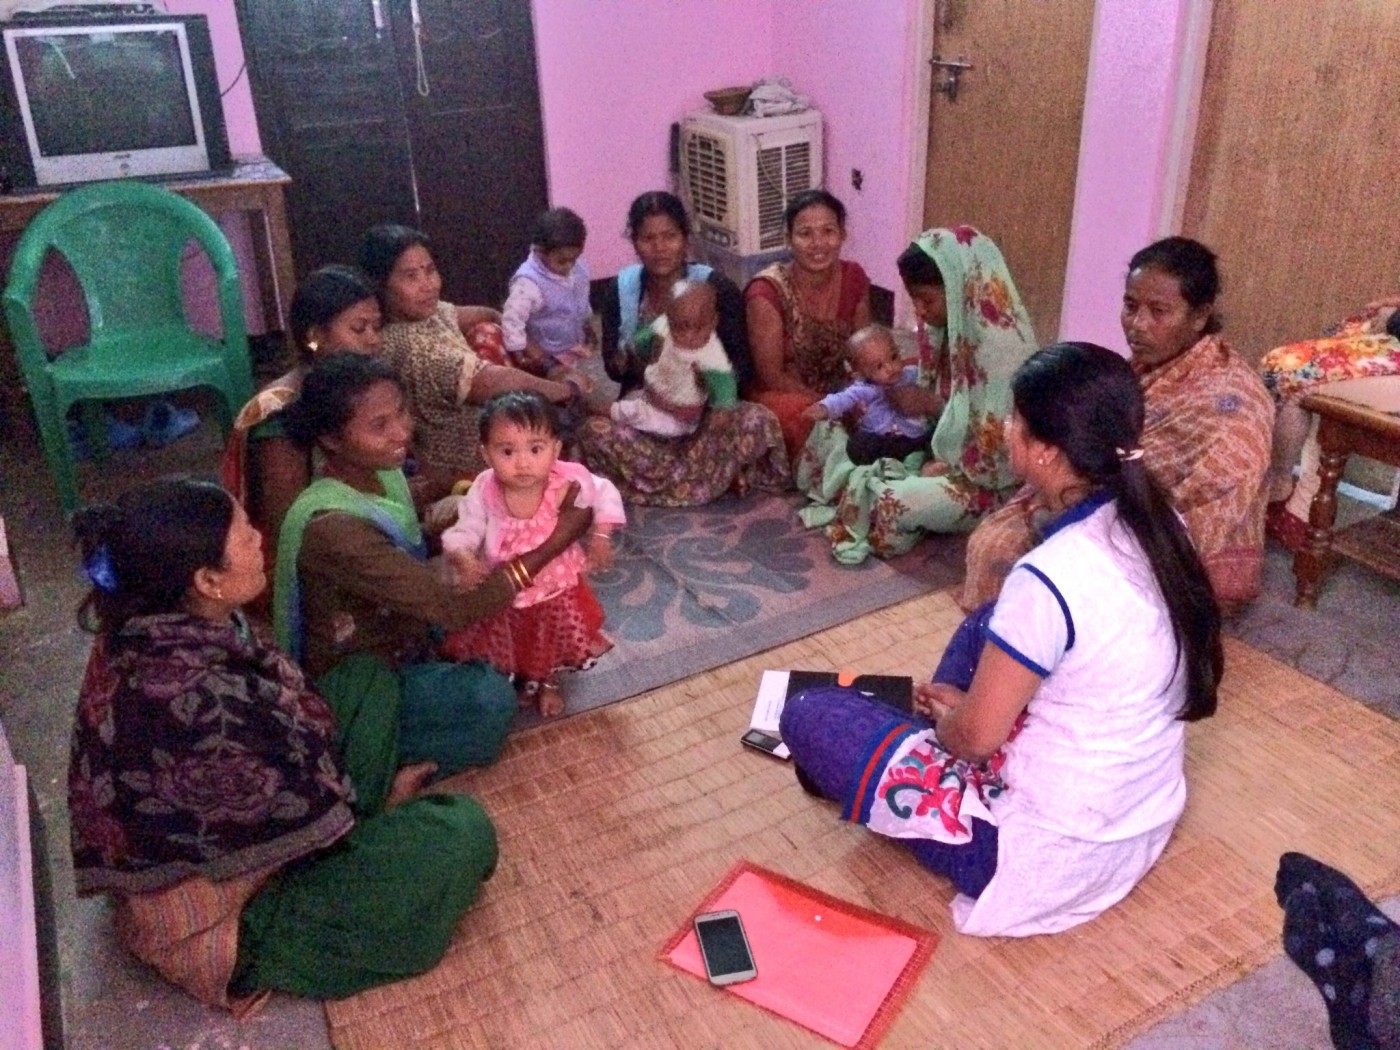 Gathering women for a focus group discussion in a rural area of Nepal